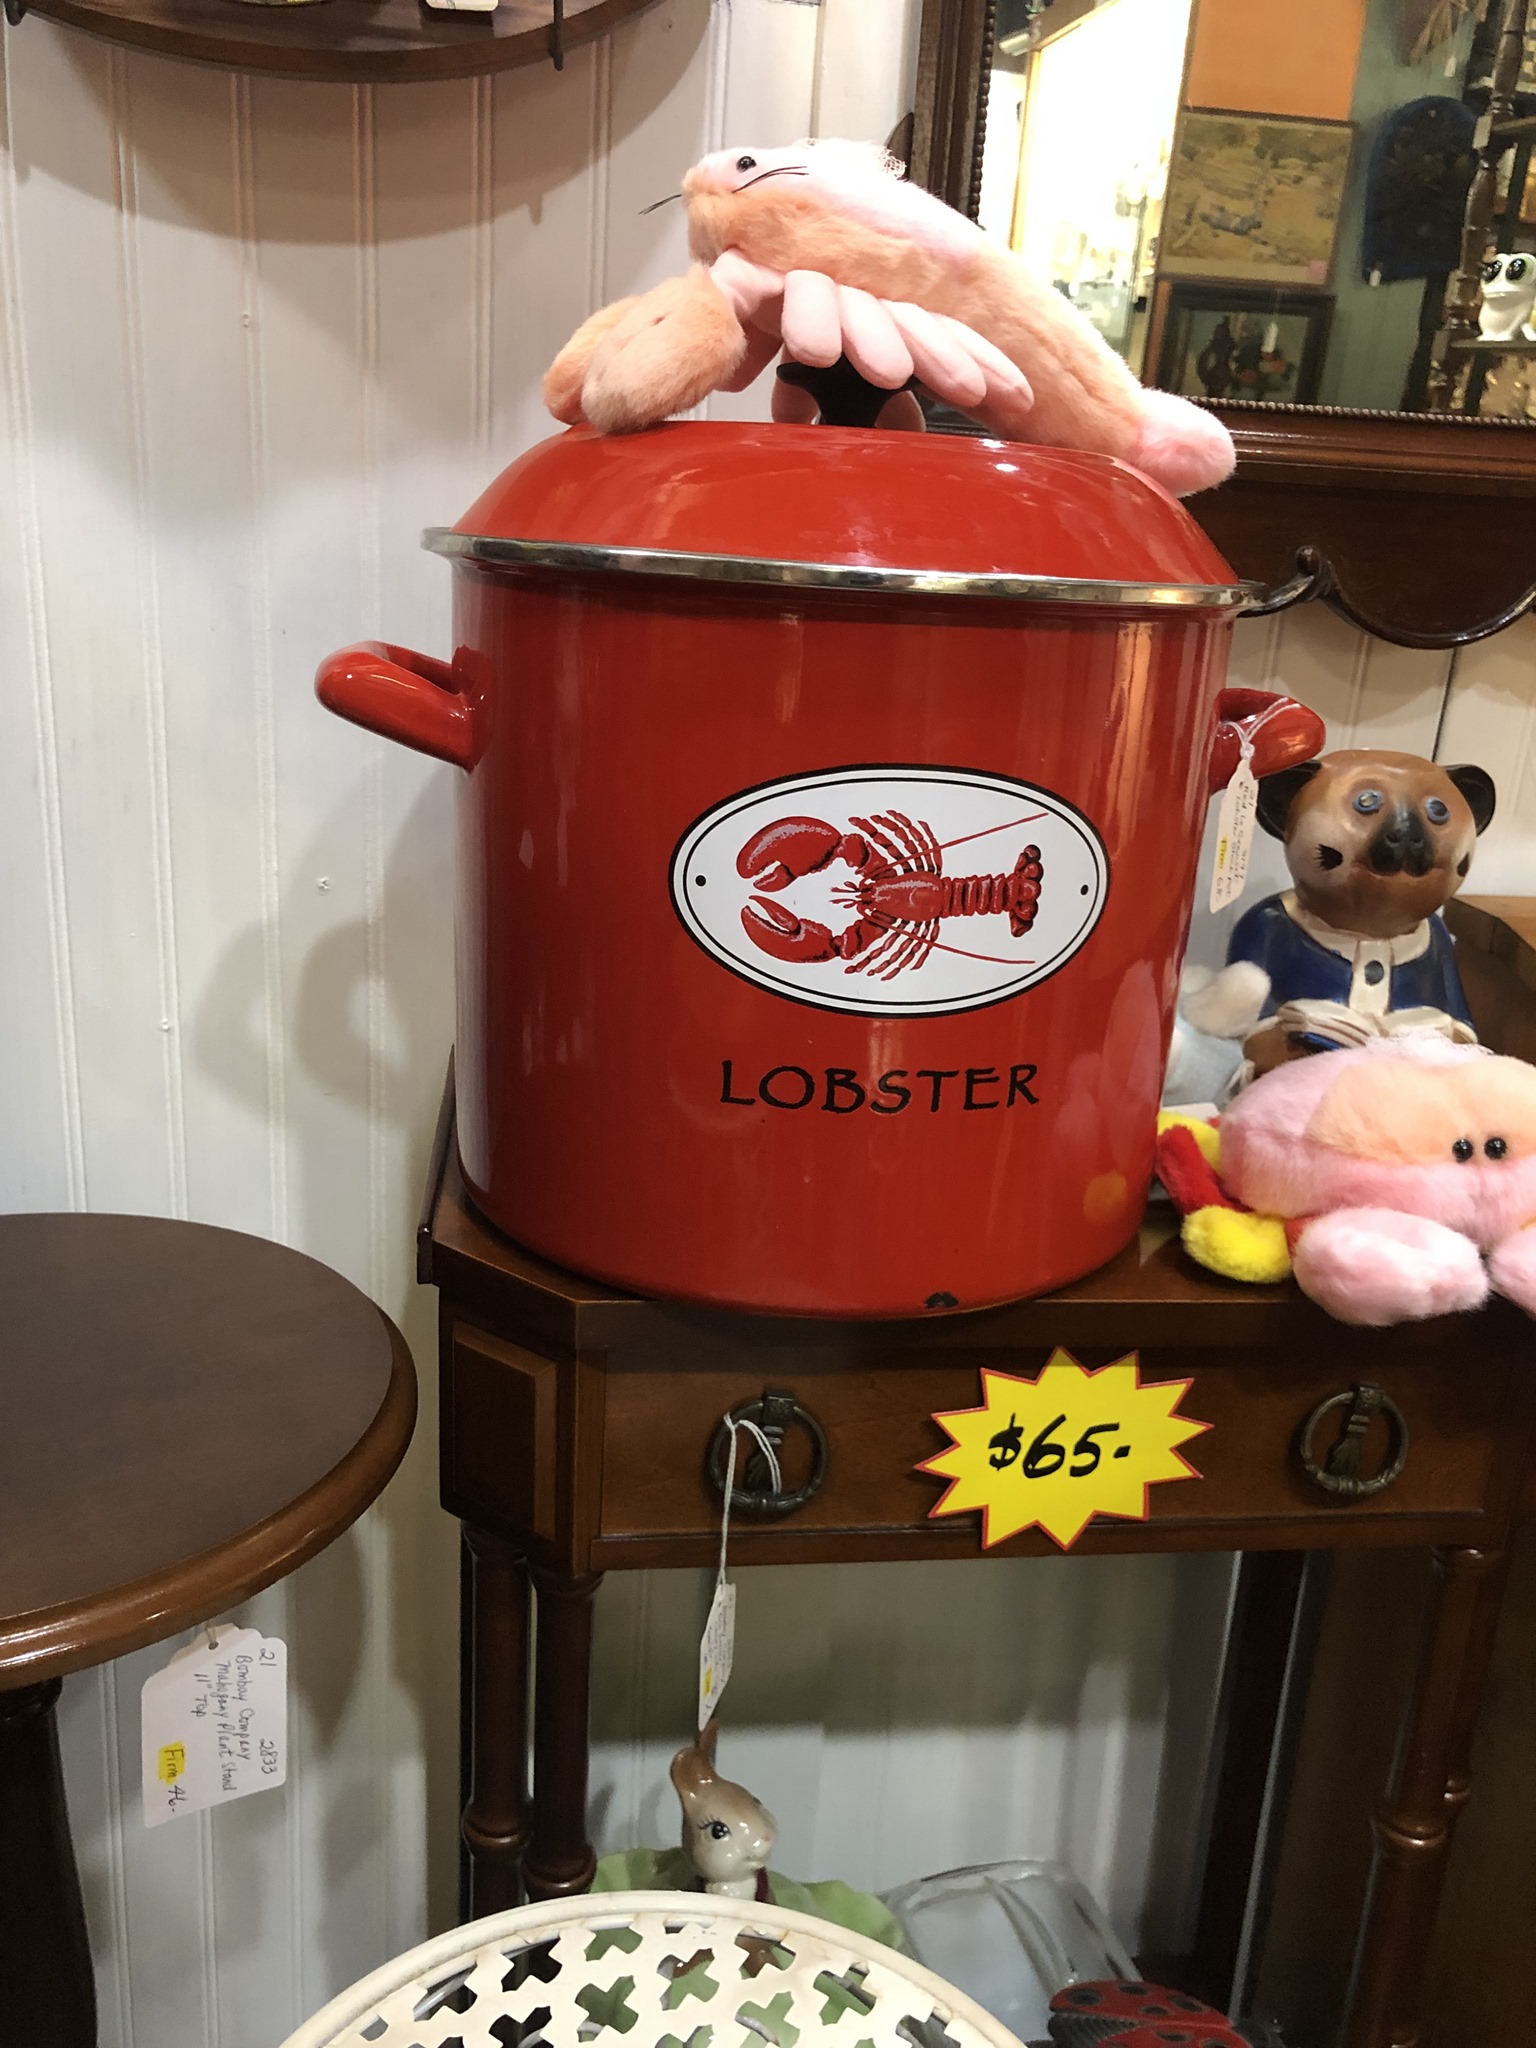 Scranberry Coop Snapshots - Tosh's pick of the day! - Scranberry Coop - Vintage Store - Antiques, Collectibles, & More